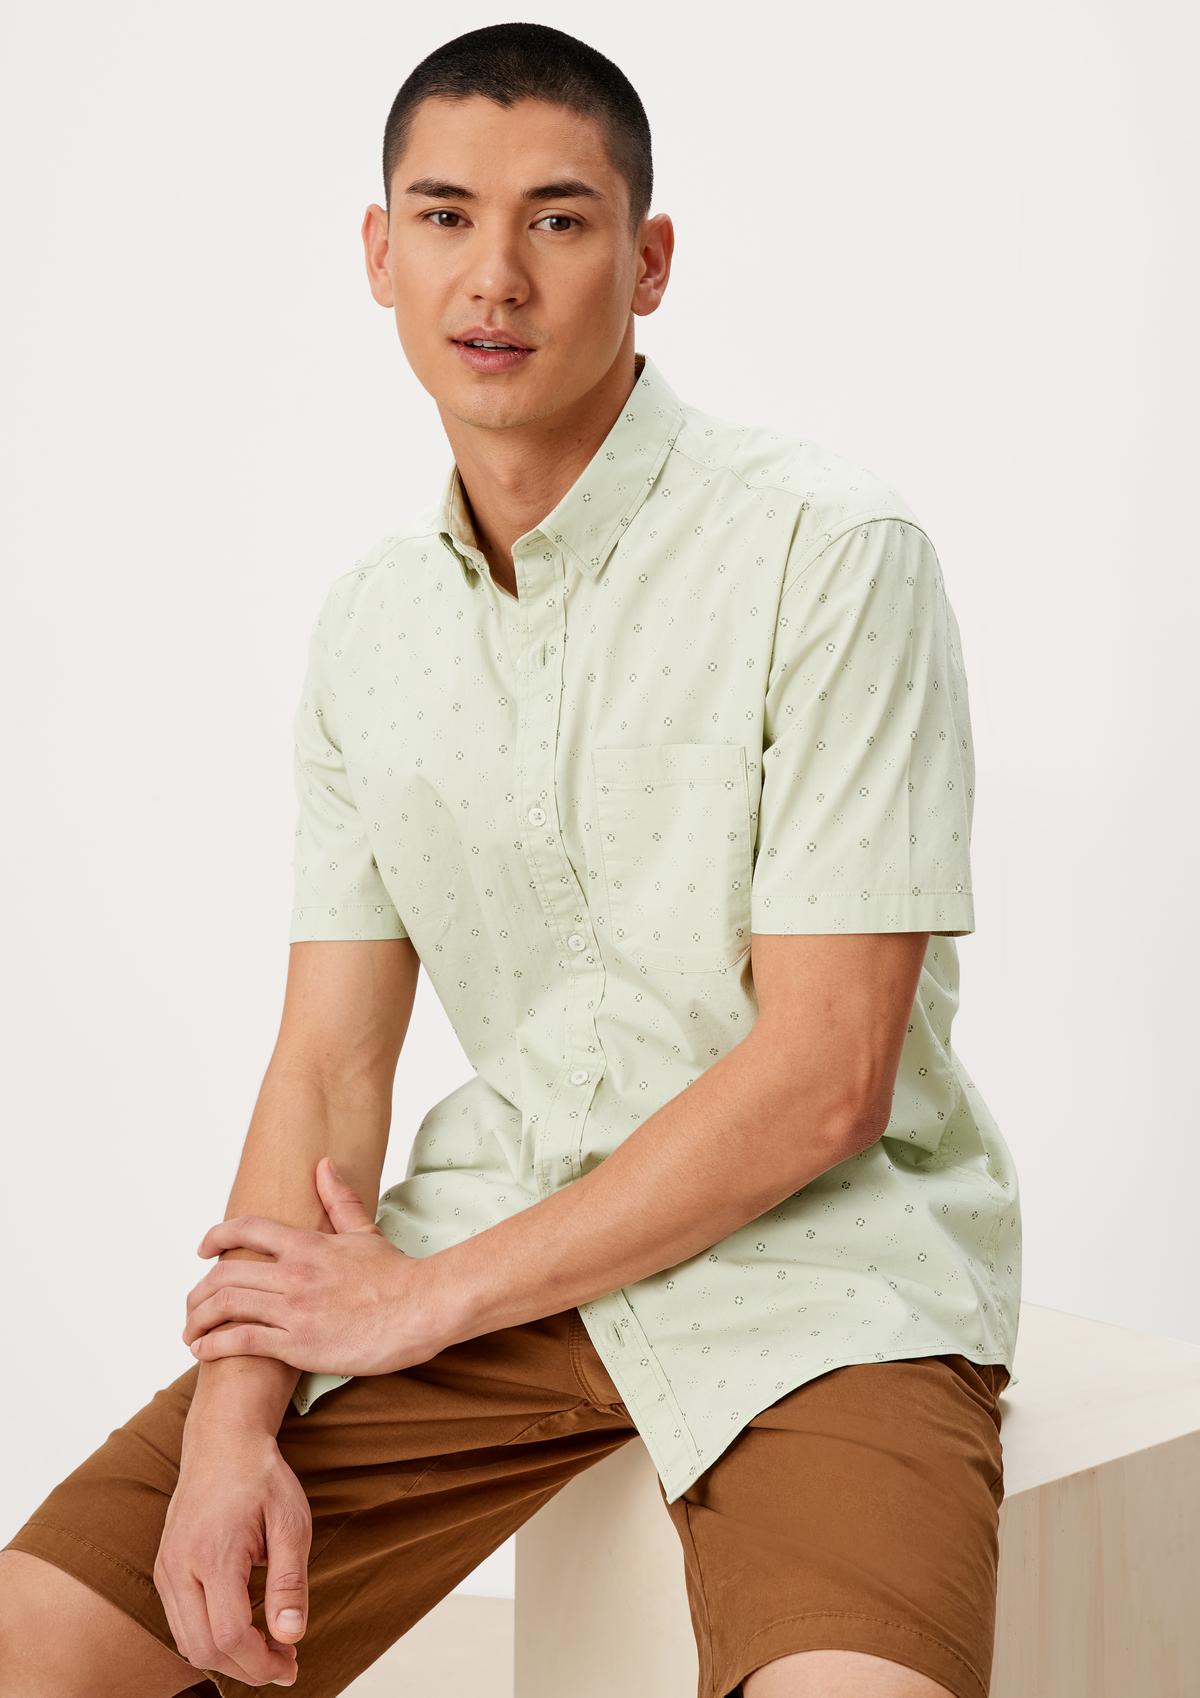 s.Oliver Regular fit: short sleeve shirt with a minimalist print